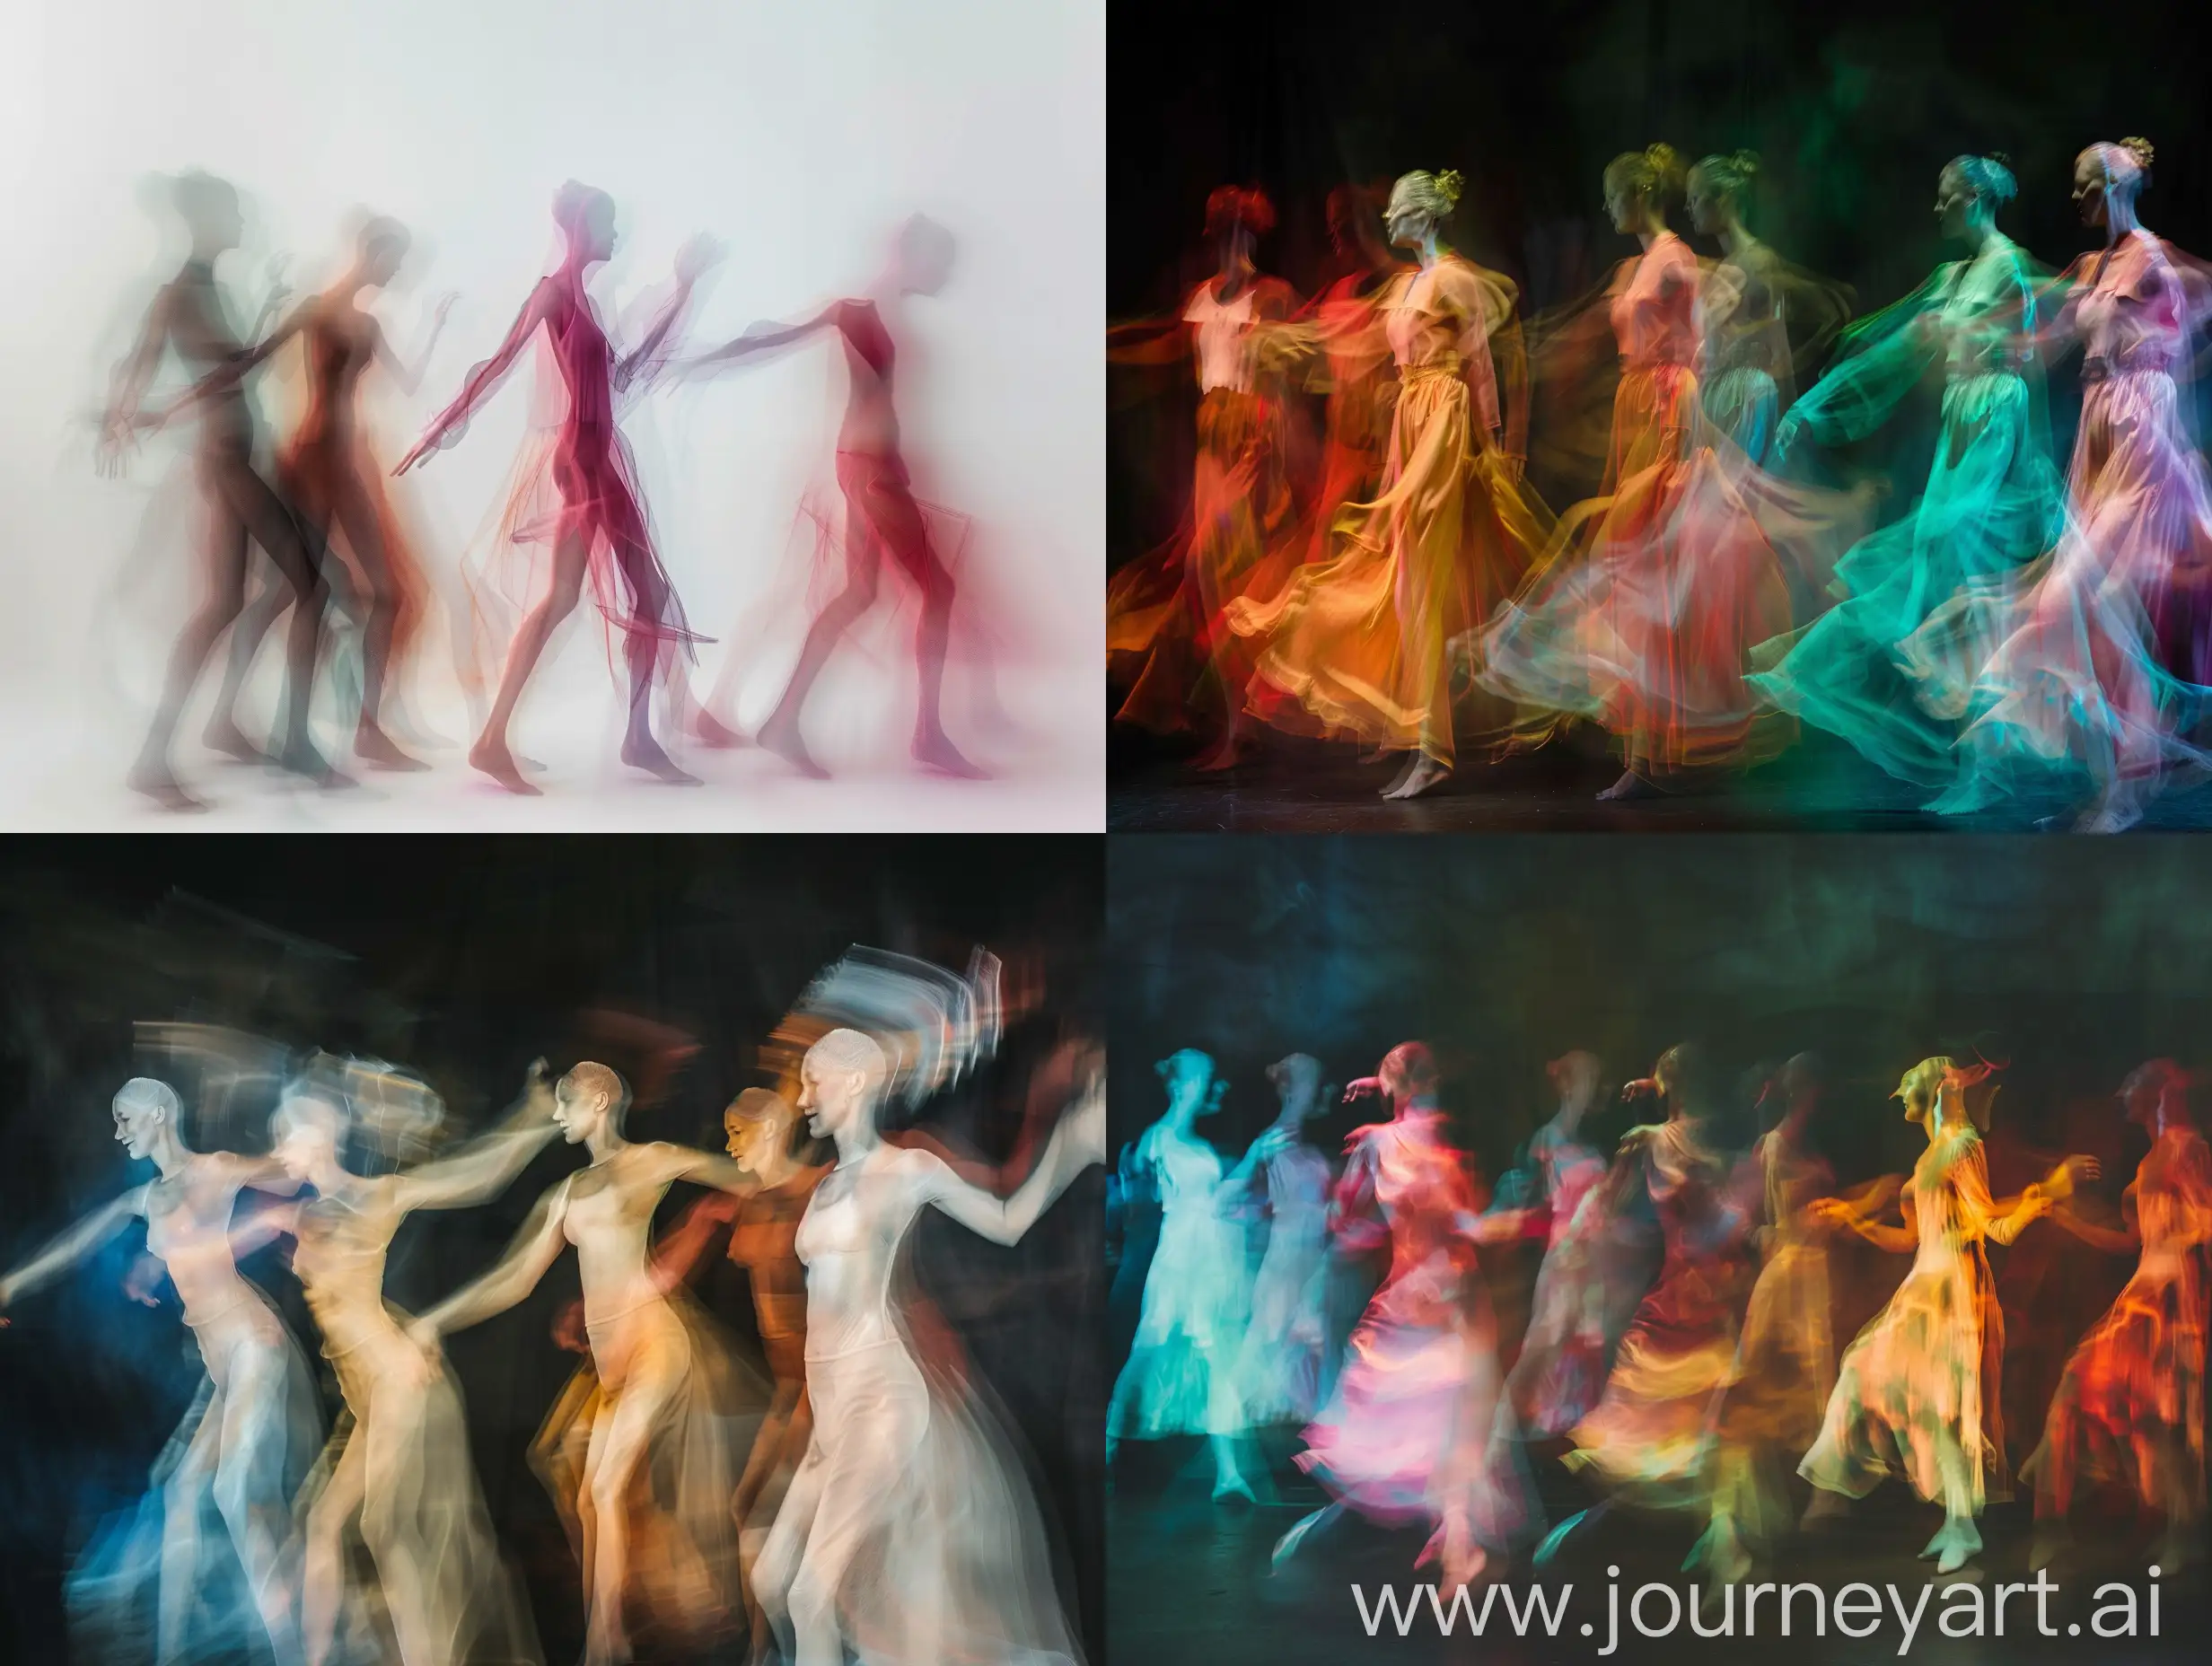 Dancing figures in the style of blurred forms, abstracted figurative forms, photography installations, elongated forms, shaped canvas, soft focus, color photography